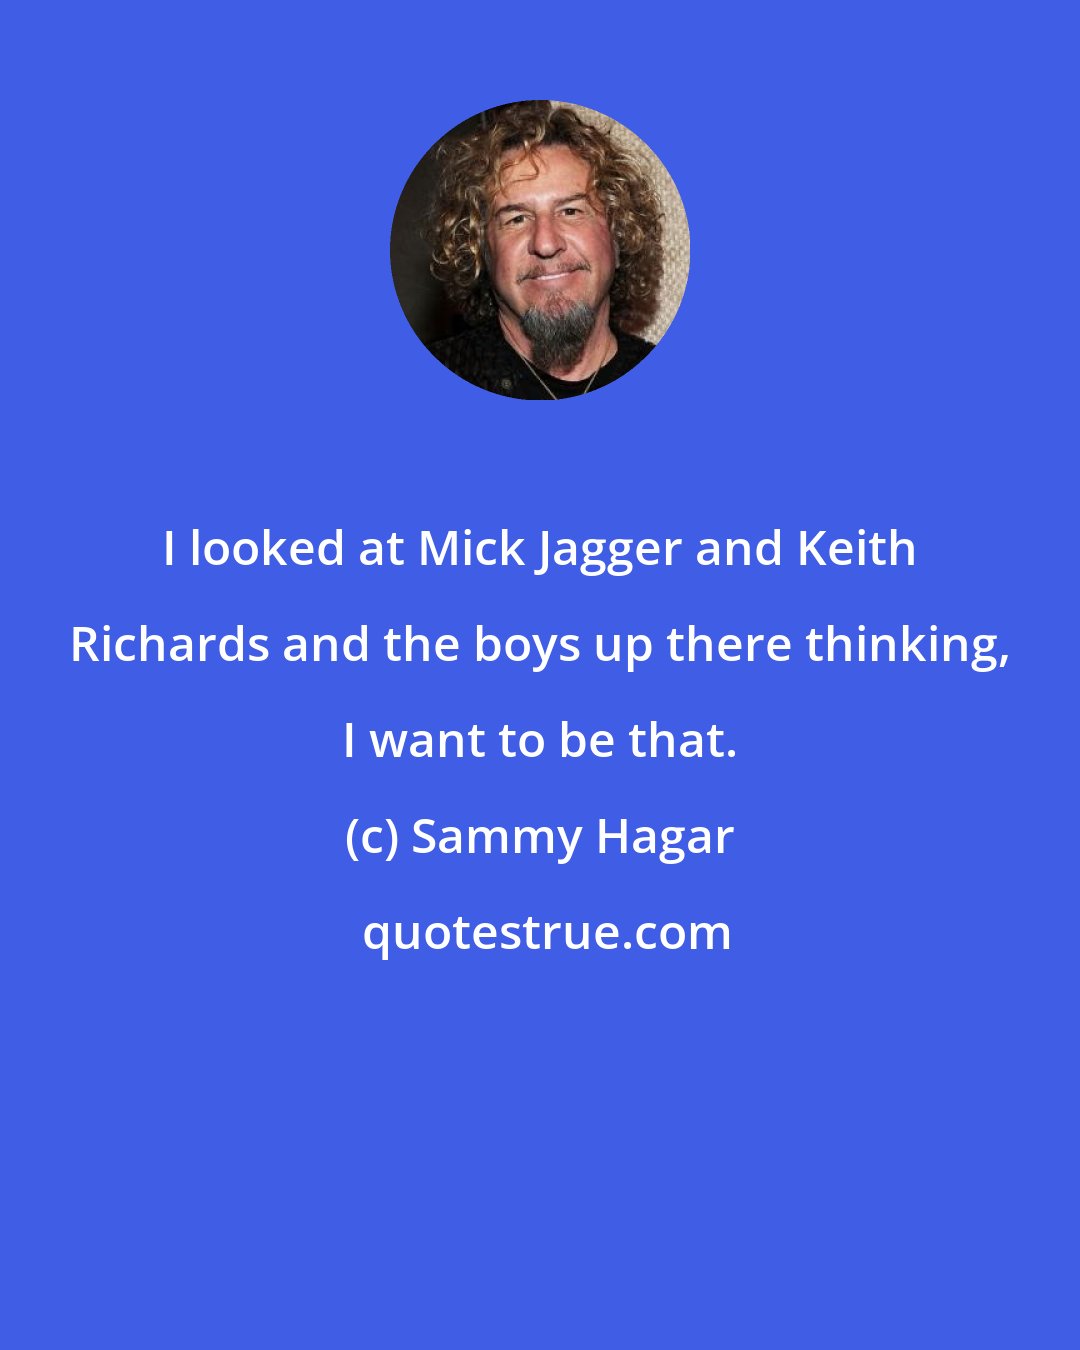 Sammy Hagar: I looked at Mick Jagger and Keith Richards and the boys up there thinking, I want to be that.